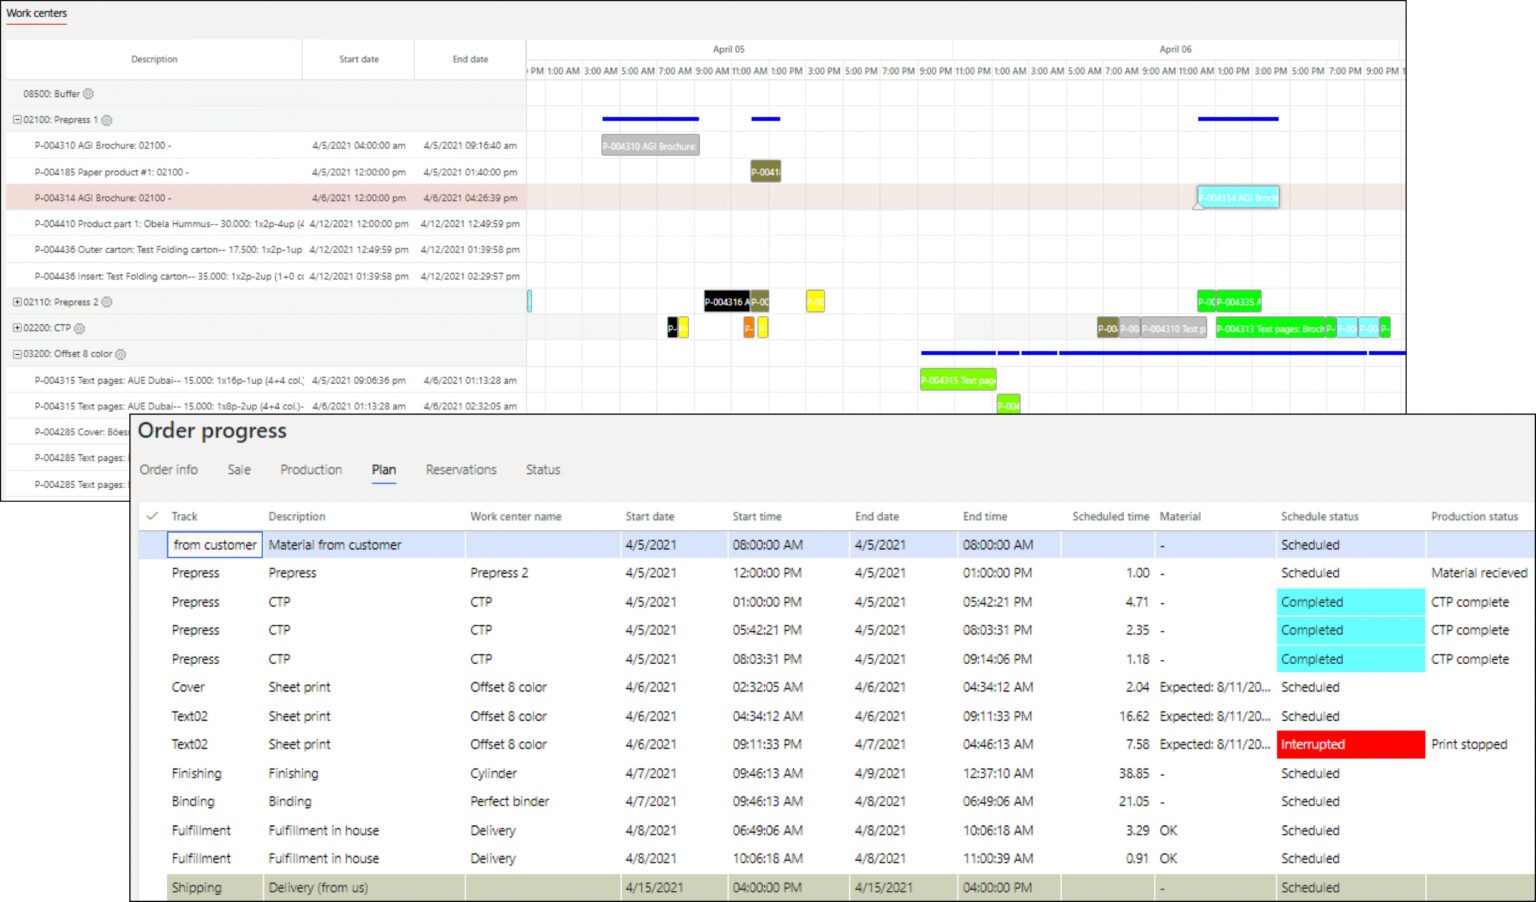 Scheduling - the ultimate tool to organize your production the most efficient way